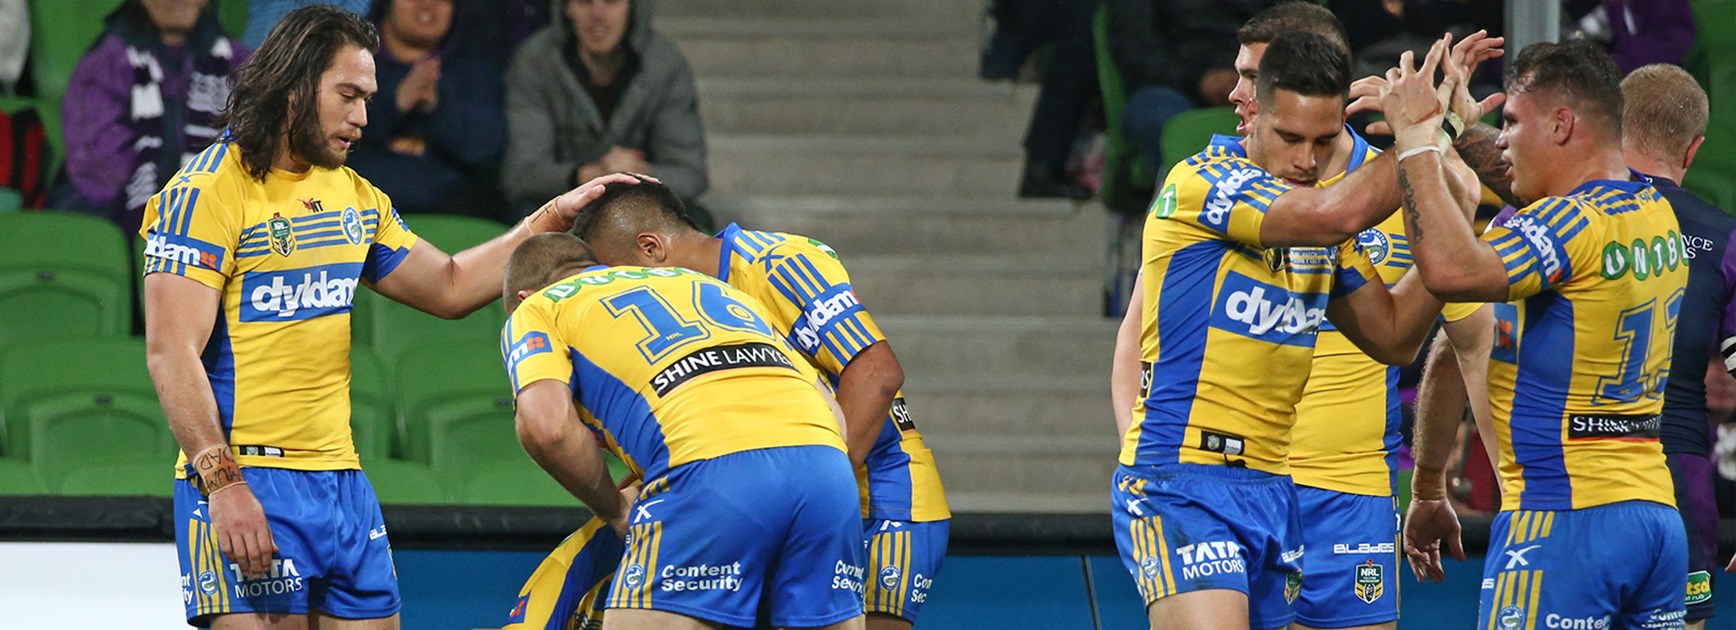 Parramatta defeated Melbourne, but have a horror injury list out of Monday night's game at AAMI Park.